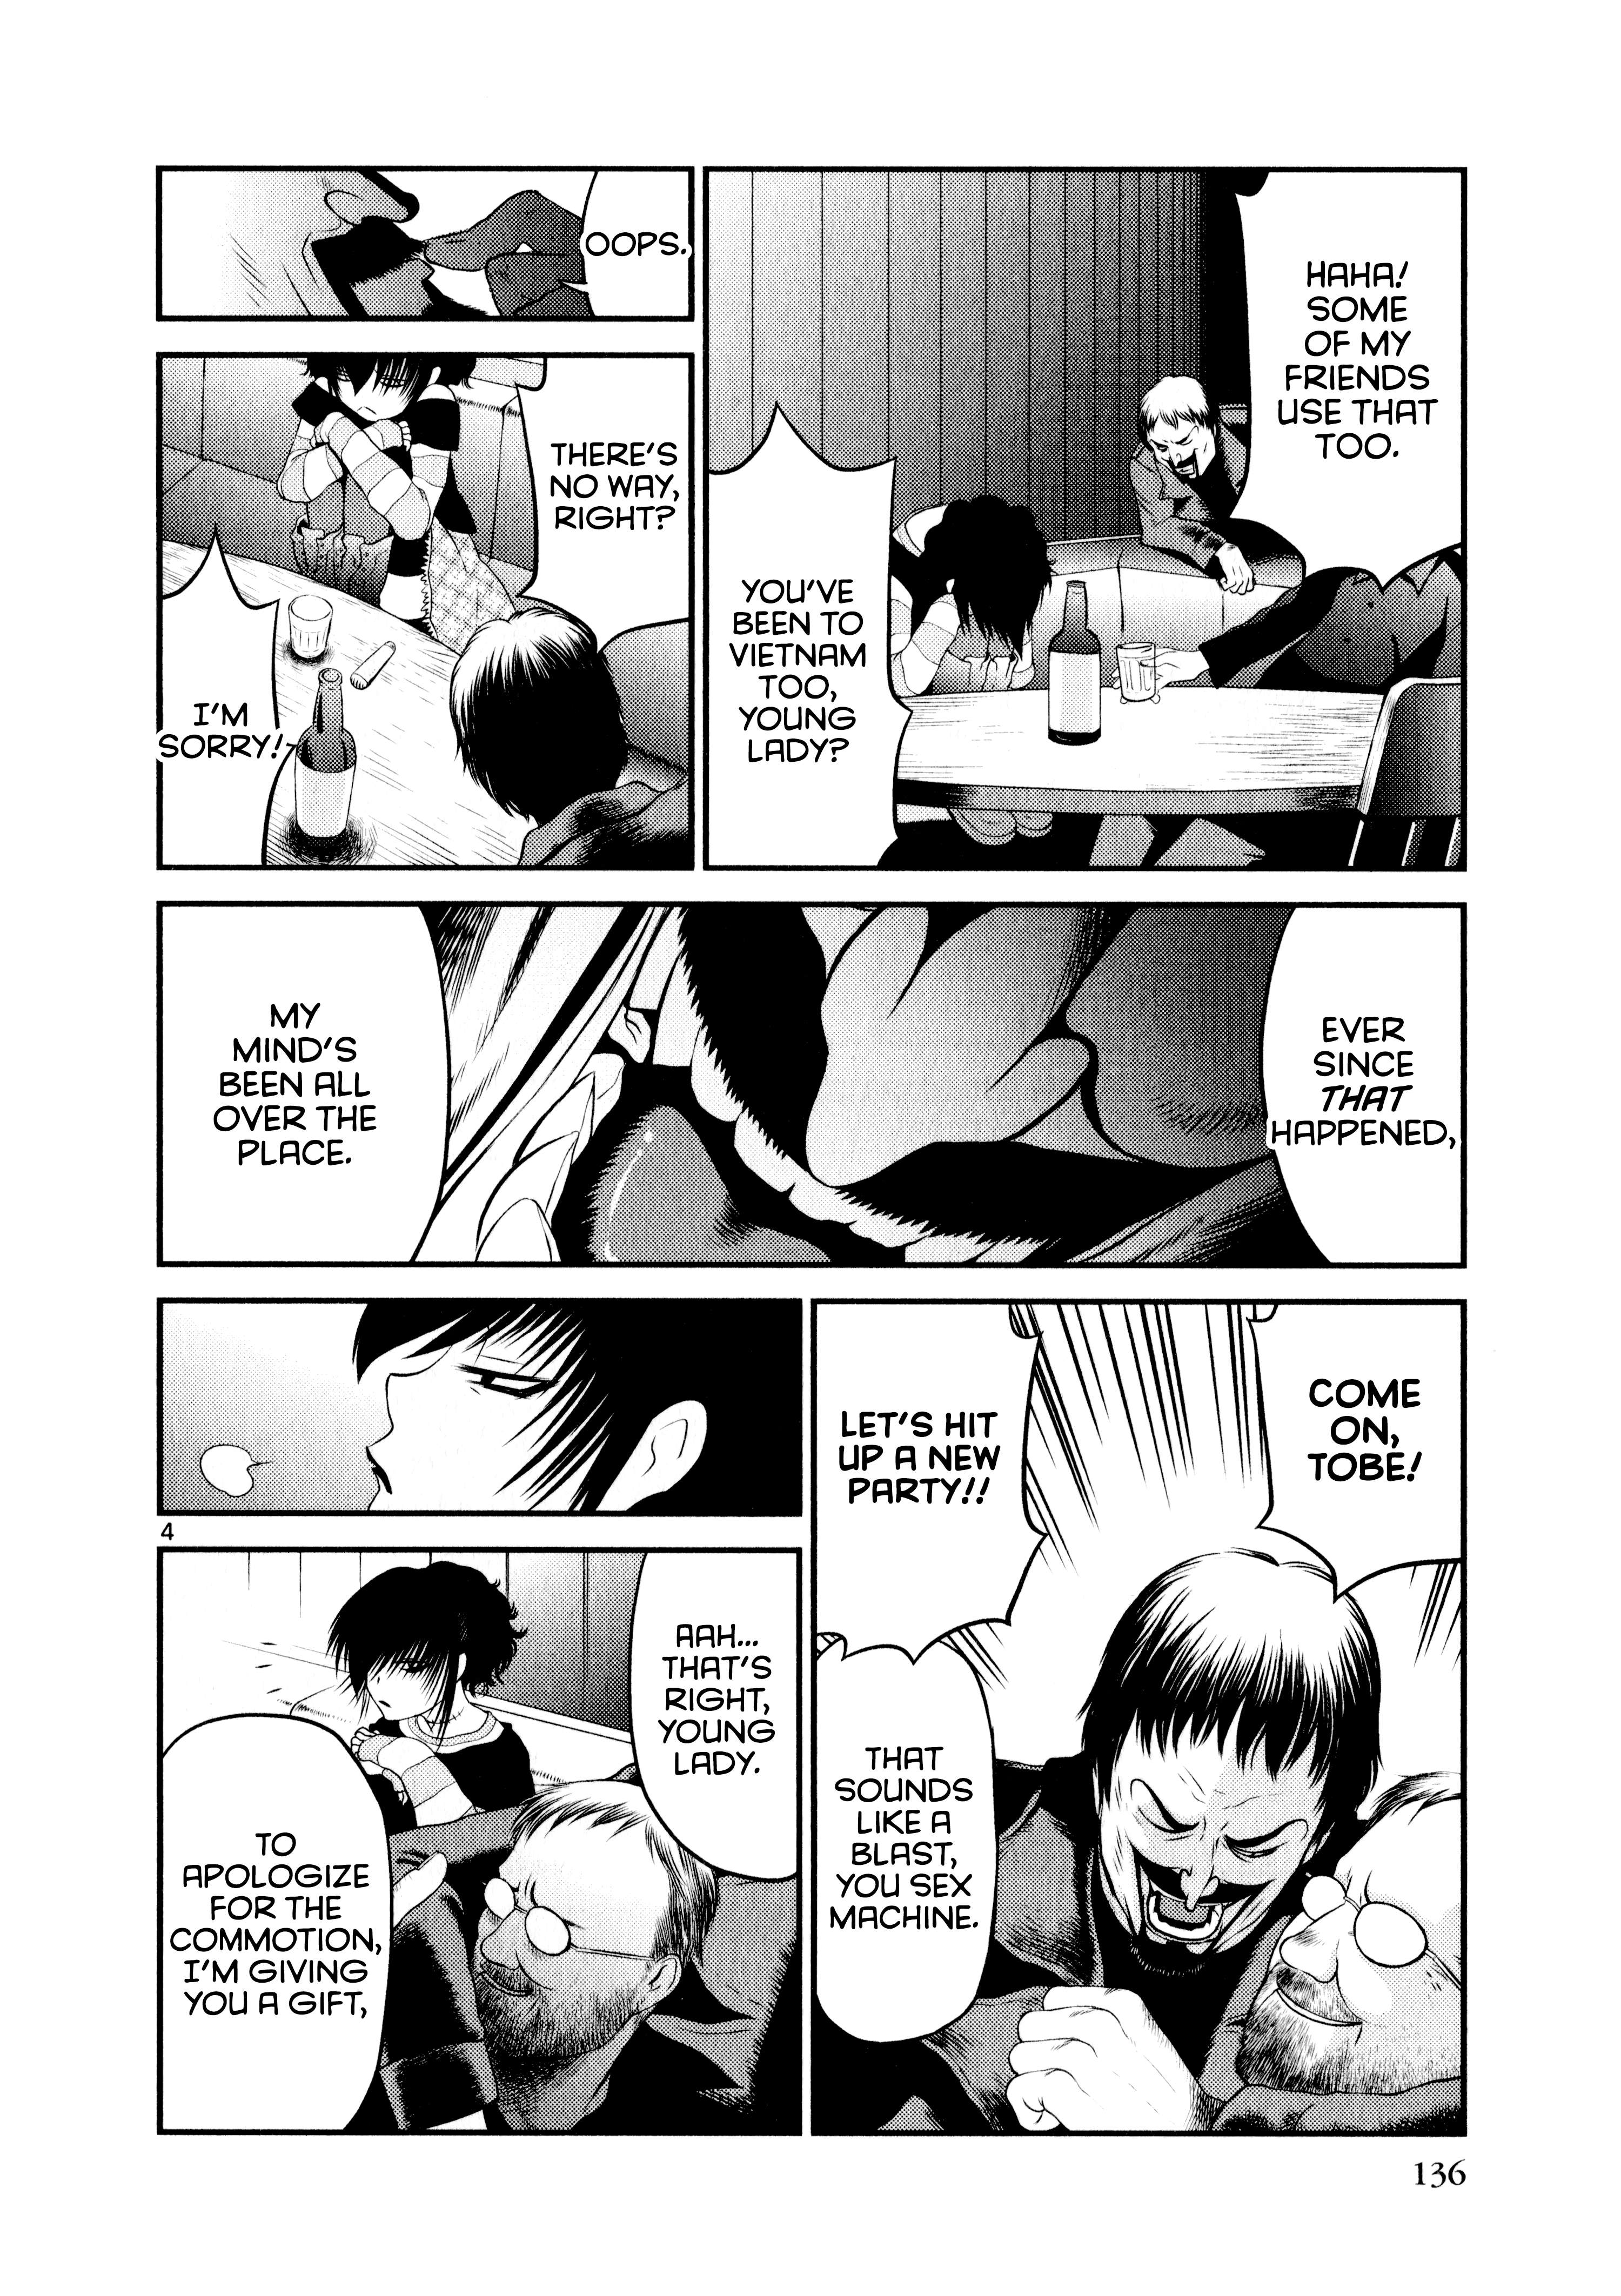 Black Lagoon: Sawyer the Cleaner - Dismemberment! Gore Gore Girl - chapter 7.5 - #4